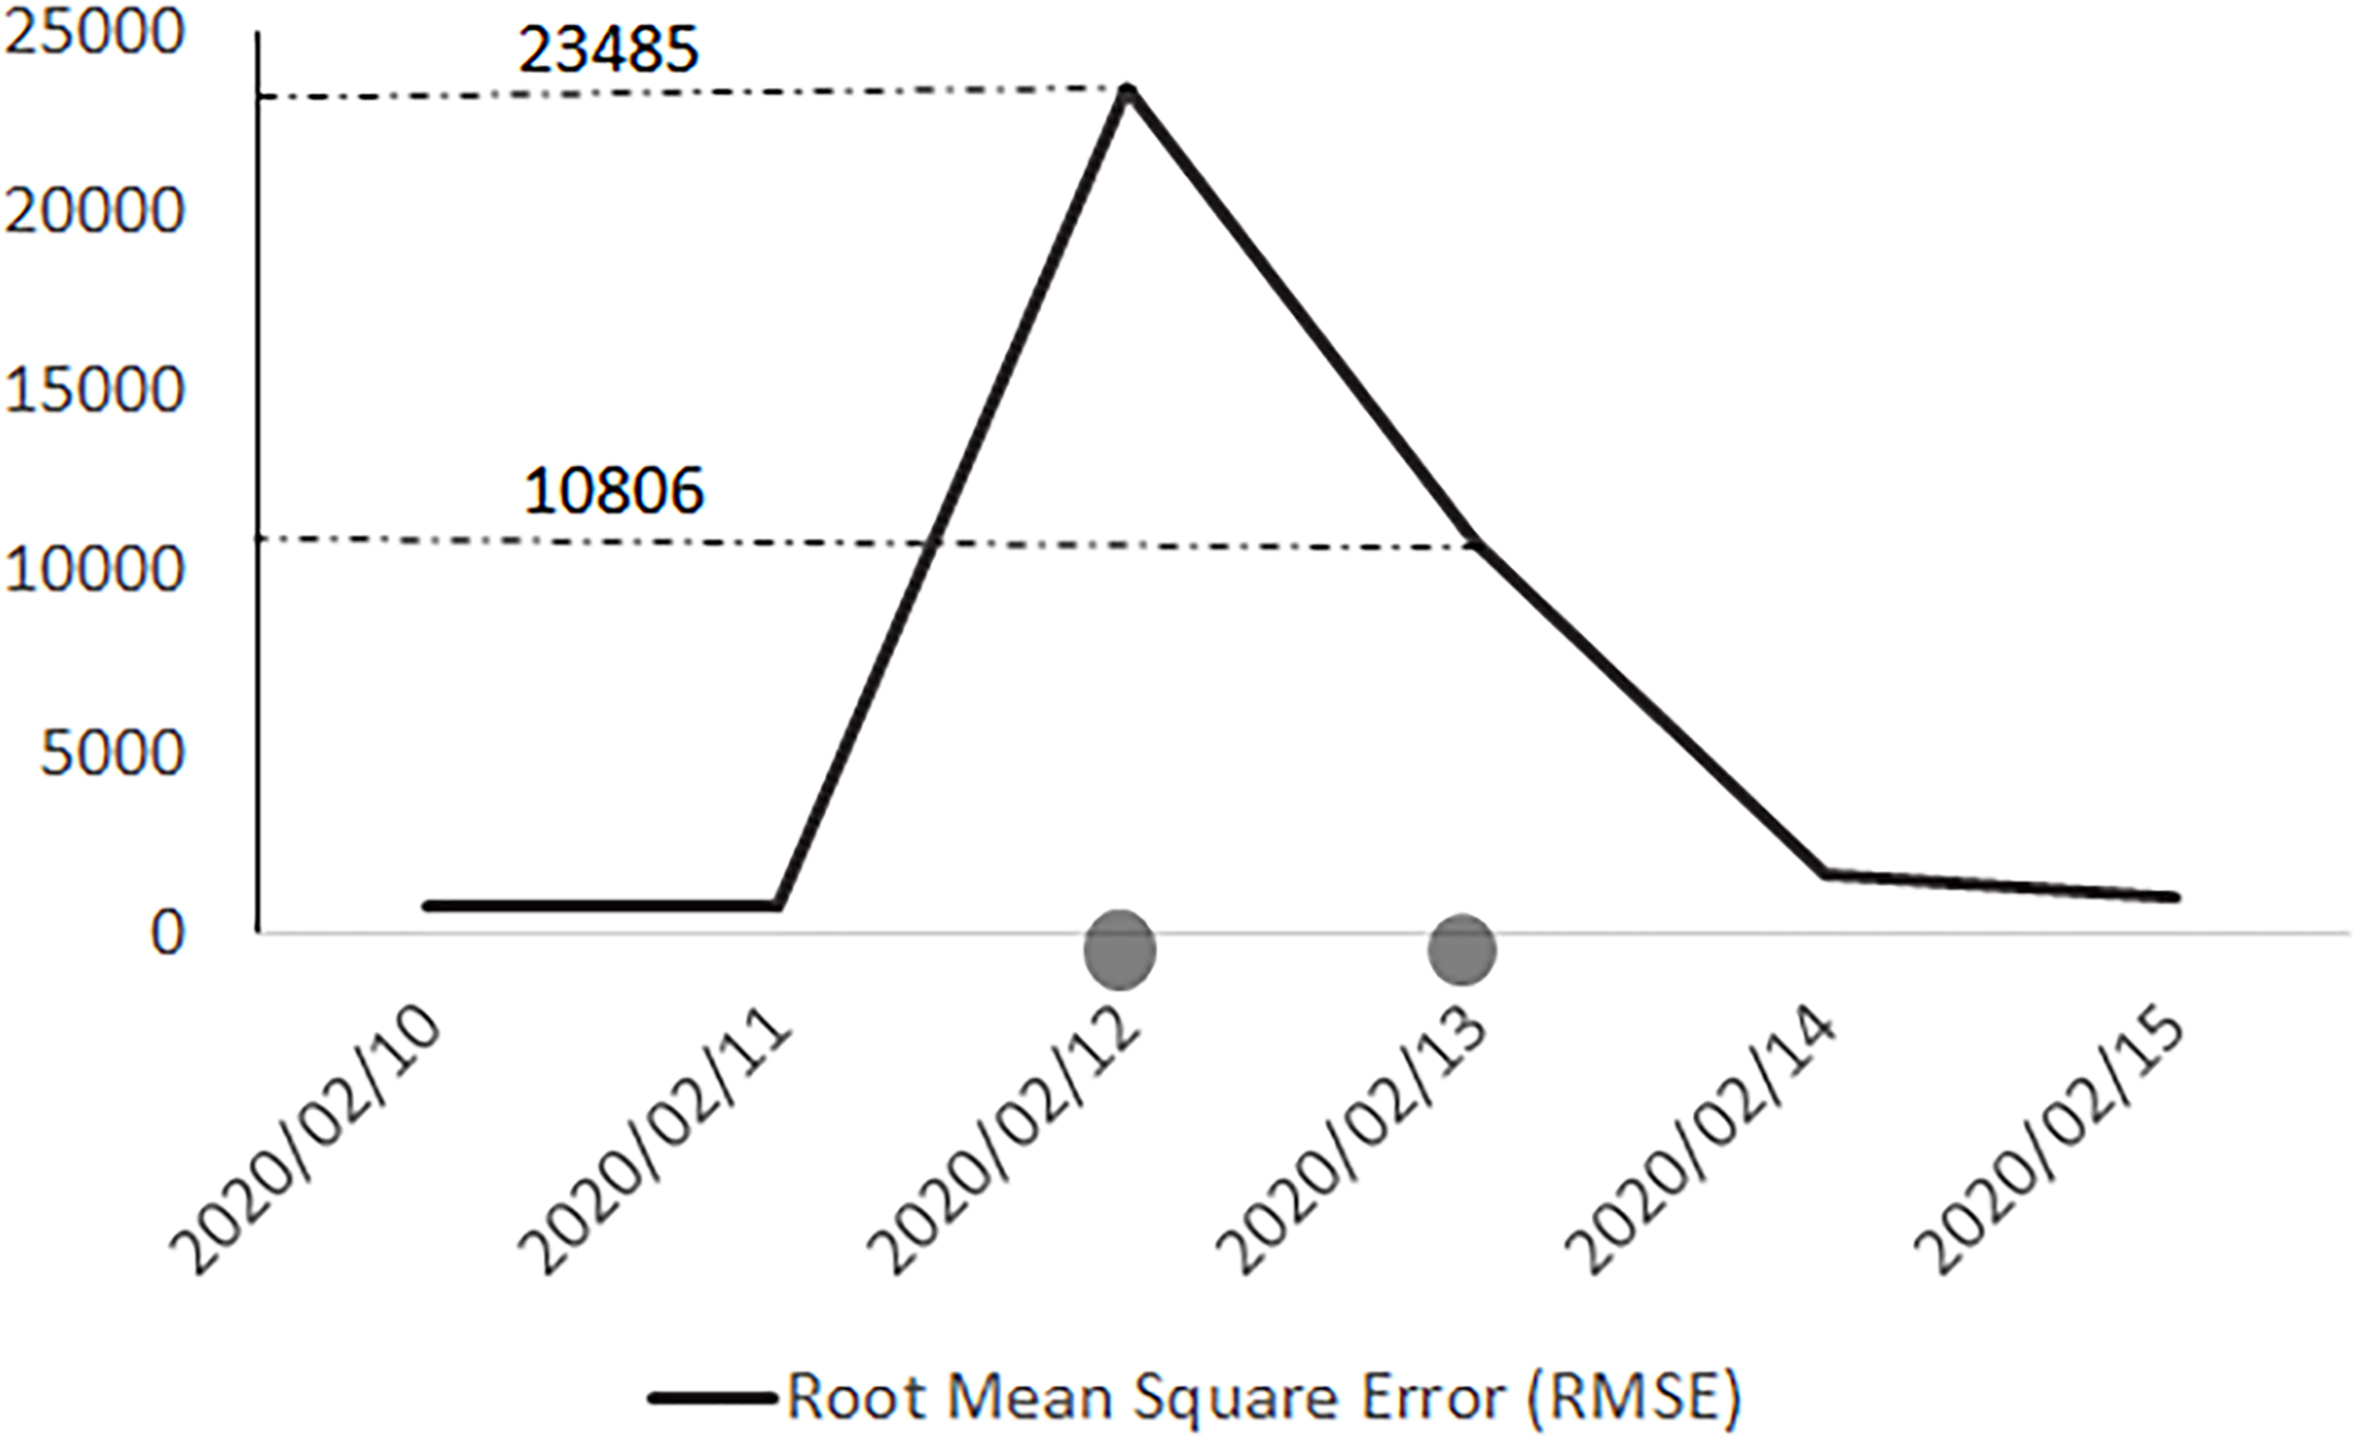 Daily Sum of square error aggregated for all attributes, countries and datasets.